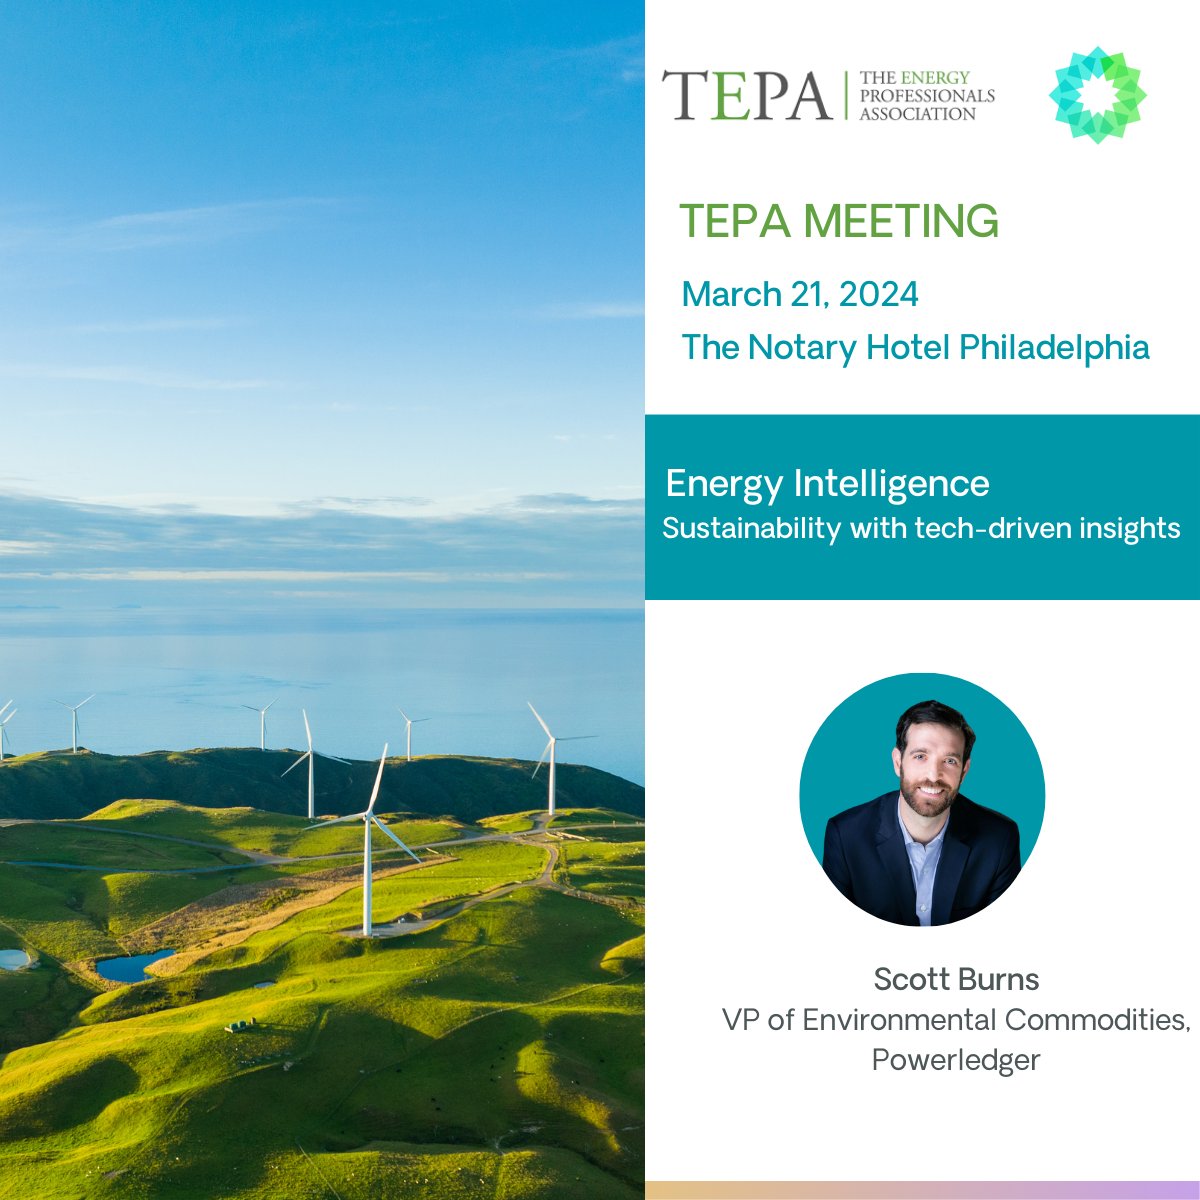 Our VP of Environmental Commodities, Scott Burns, will join The Energy Professionals Association (@_TEPA)  panel discussion today. Thematic discussion on #energymanagement and the role of data and #tech in corporate #sustainability. Stay tuned for insights.